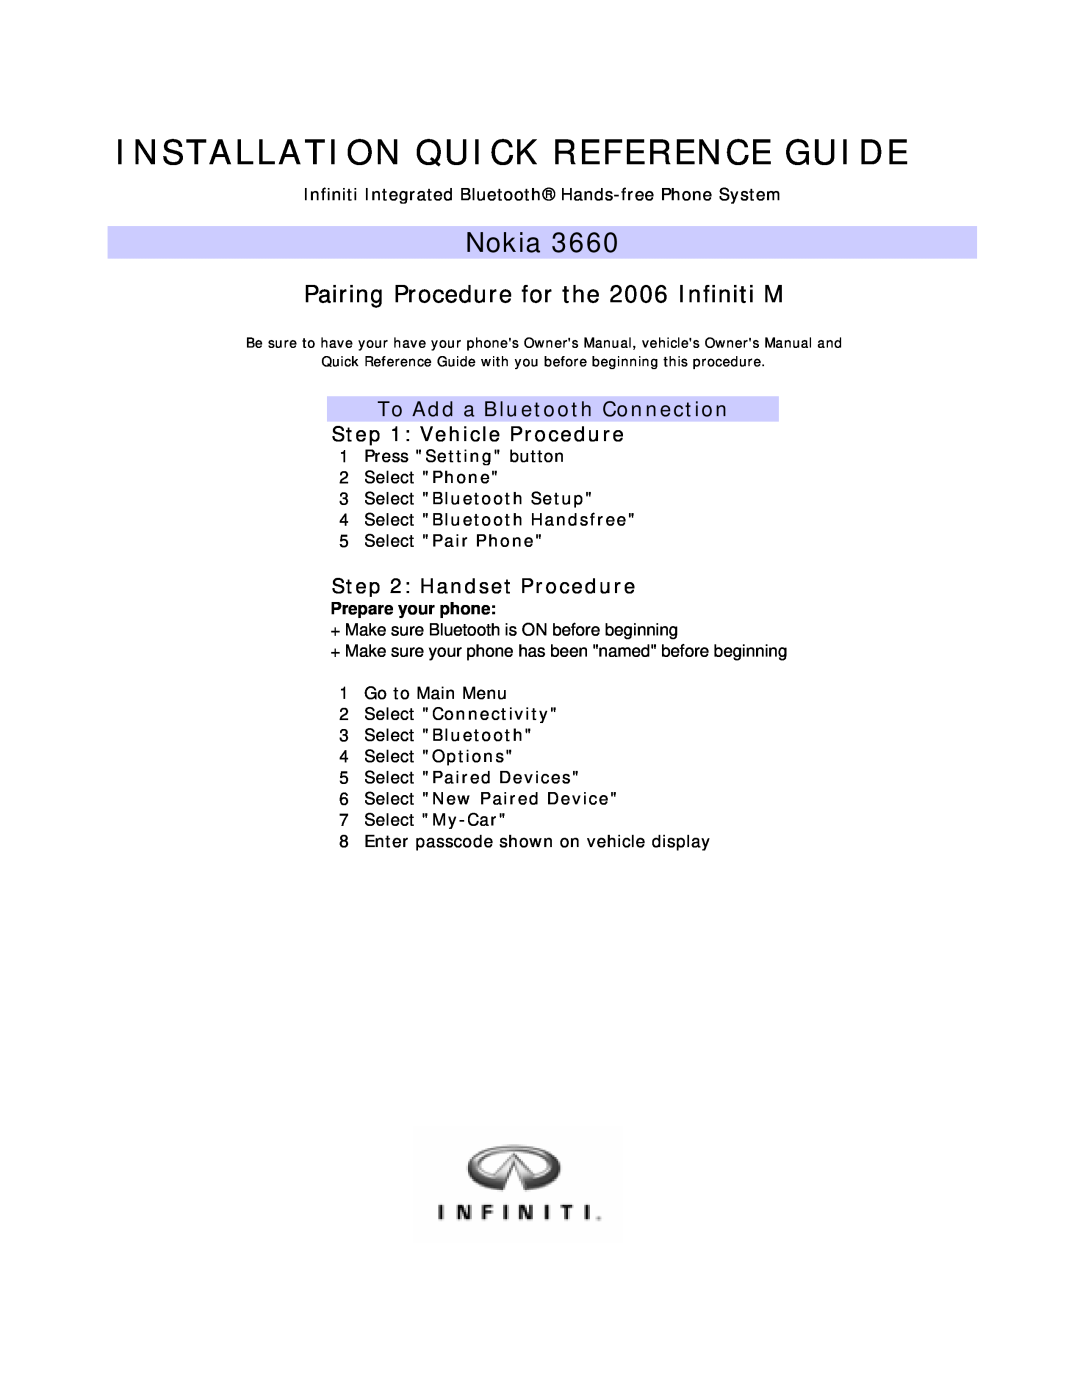 Infiniti 3600 Nokia, Installation Quick Reference Guide, Pairing Procedure for the 2006 Infiniti M, Vehicle Procedure 